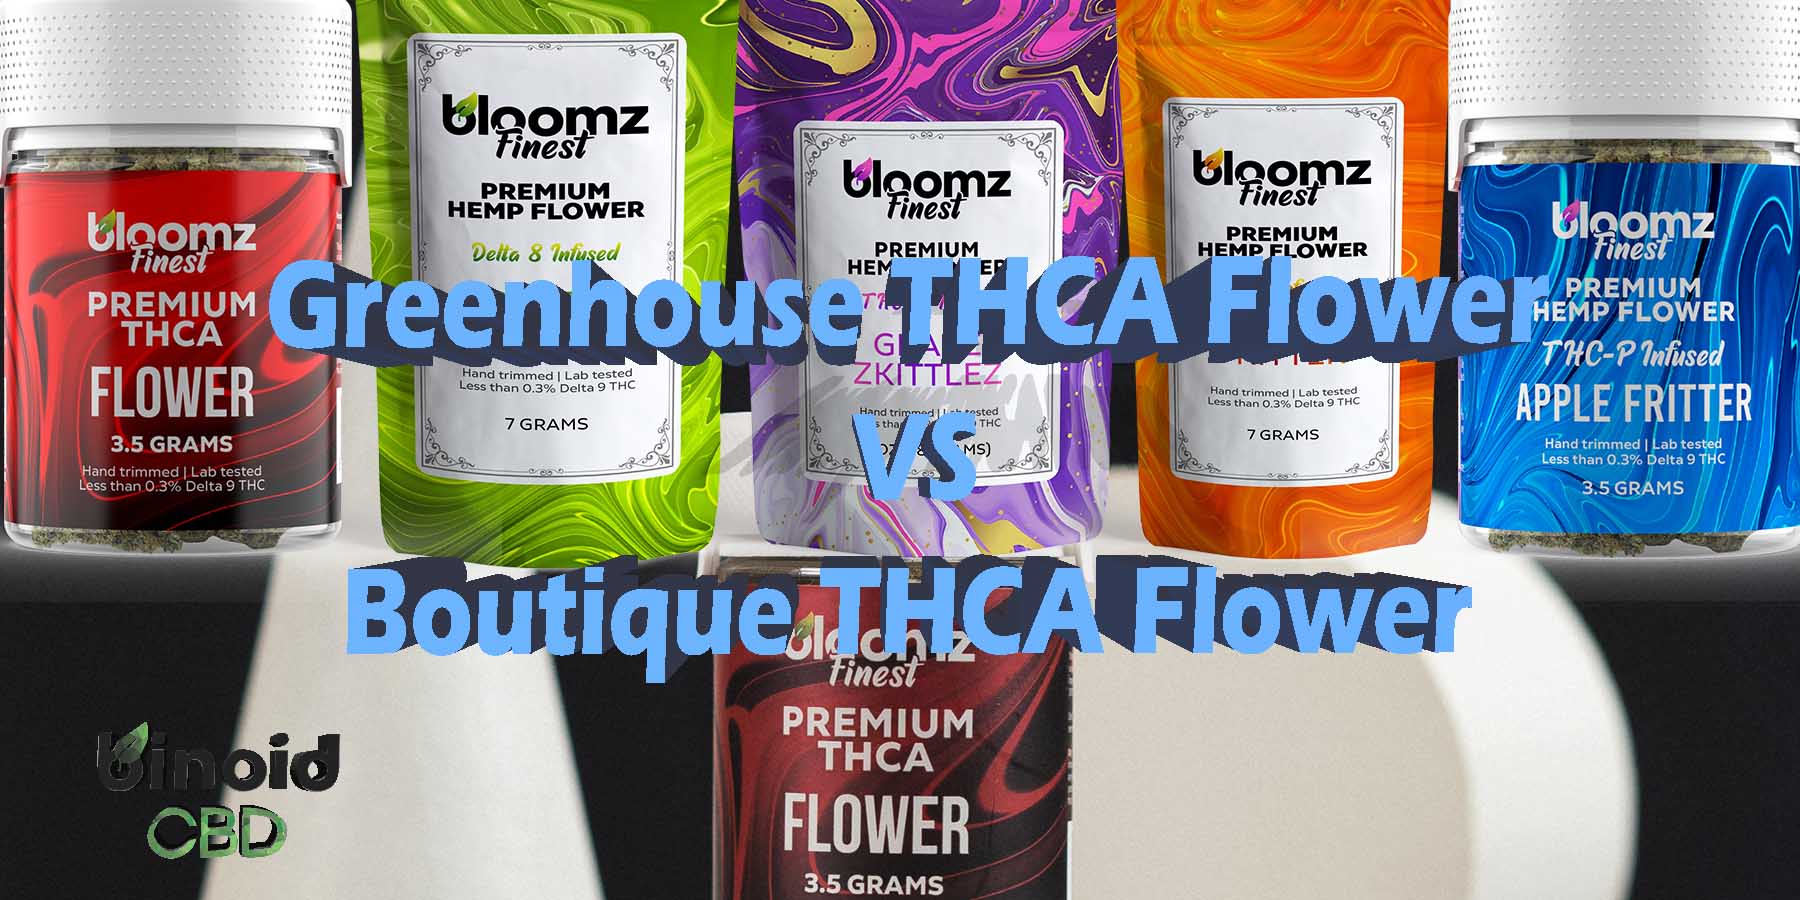 Greenhouse THCA Flower vs Boutique THCA Flower THCA Flower Where To Get Near Me Best Place Lowest Price Coupon Discount Strongest Brand Bloomz